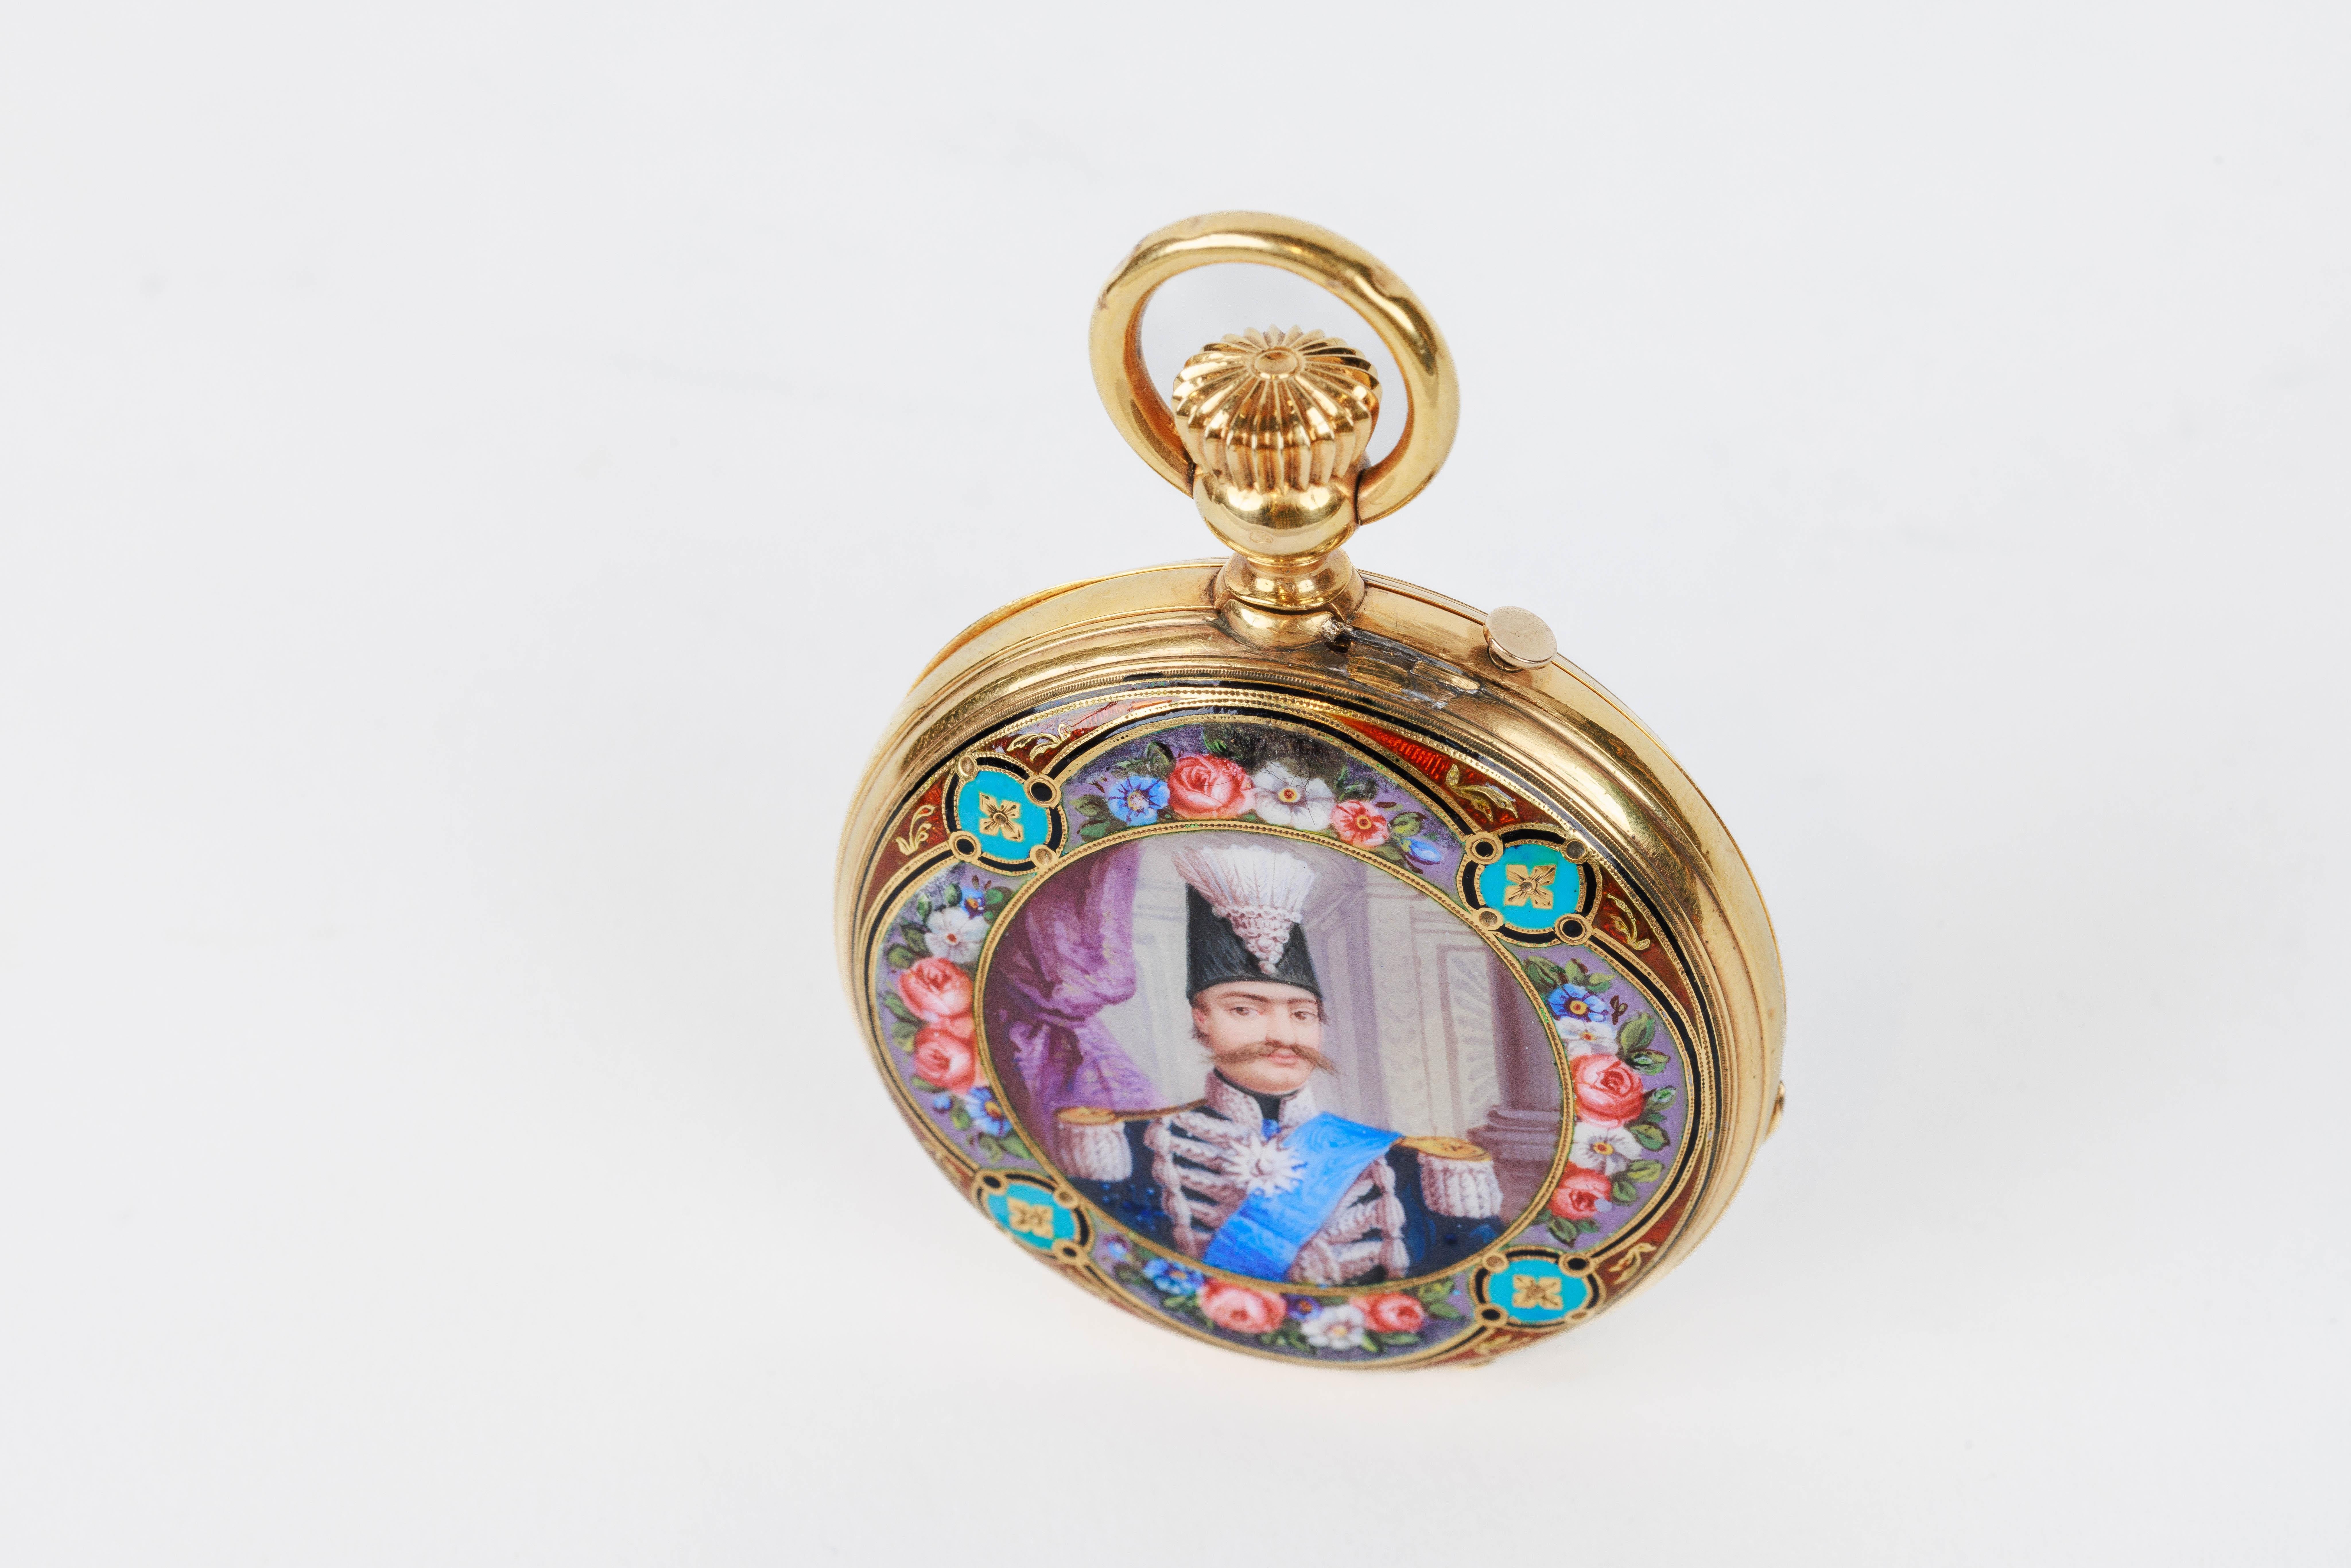 Rare Gold and Enamel Presentation Pocket Watch with Portrait of Naser Shah For Sale 4